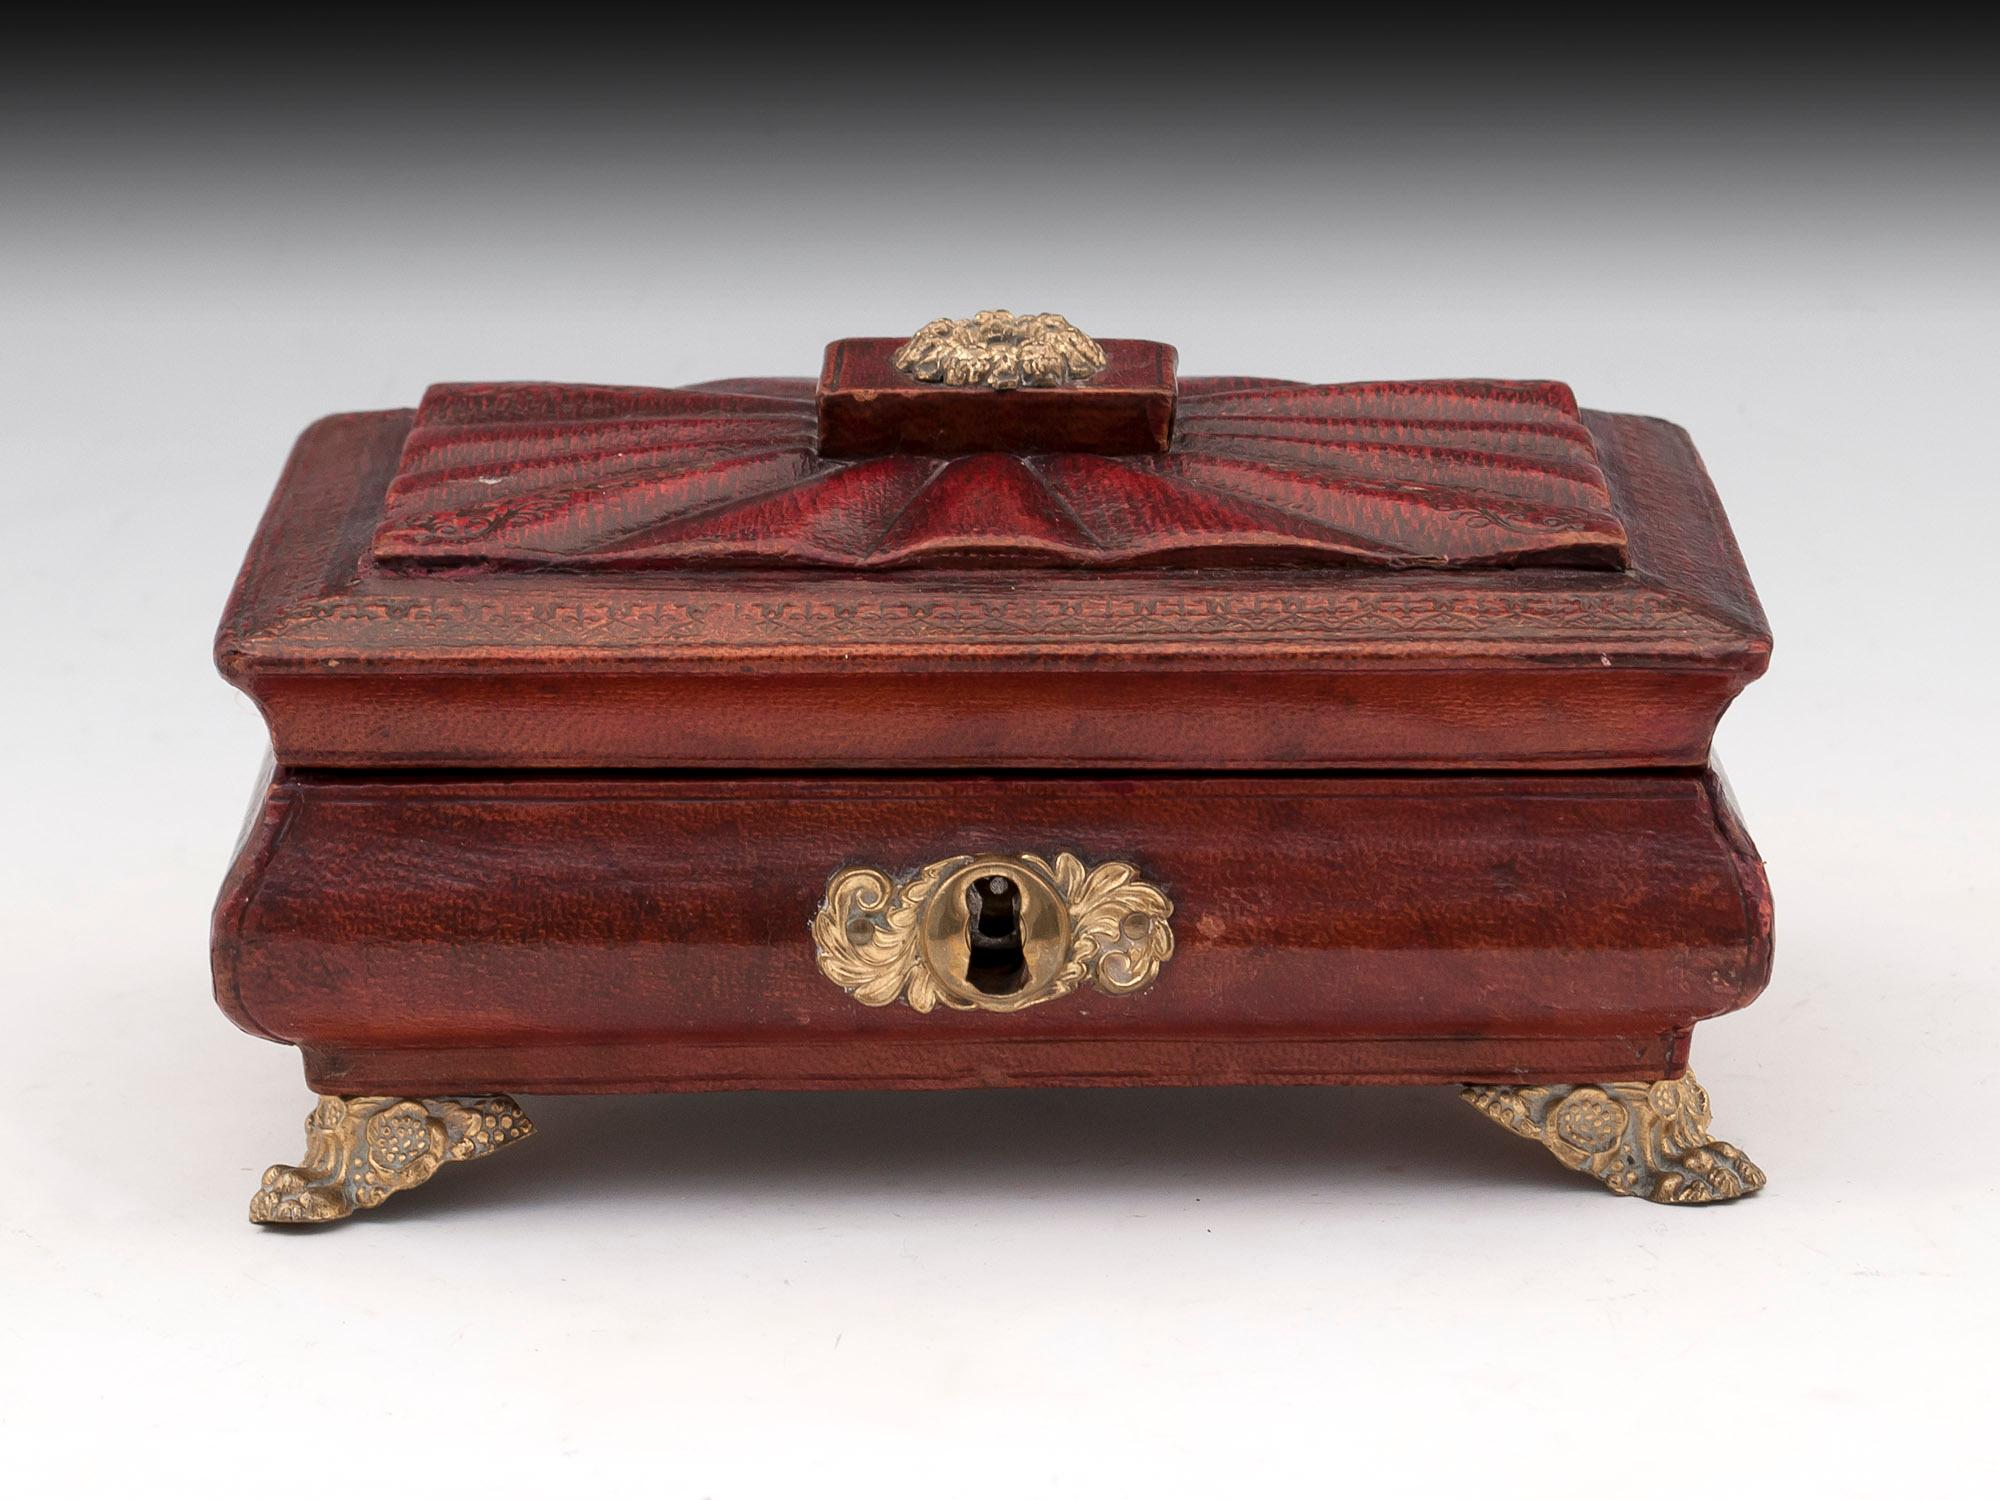 Antique red leather sewing box with ornate brass escutcheon and bracket feet. 
The blue paper lined interior features various sewing supplies including six thread reels, Bone pricker, needle case, brass thimble, and a pincushion.